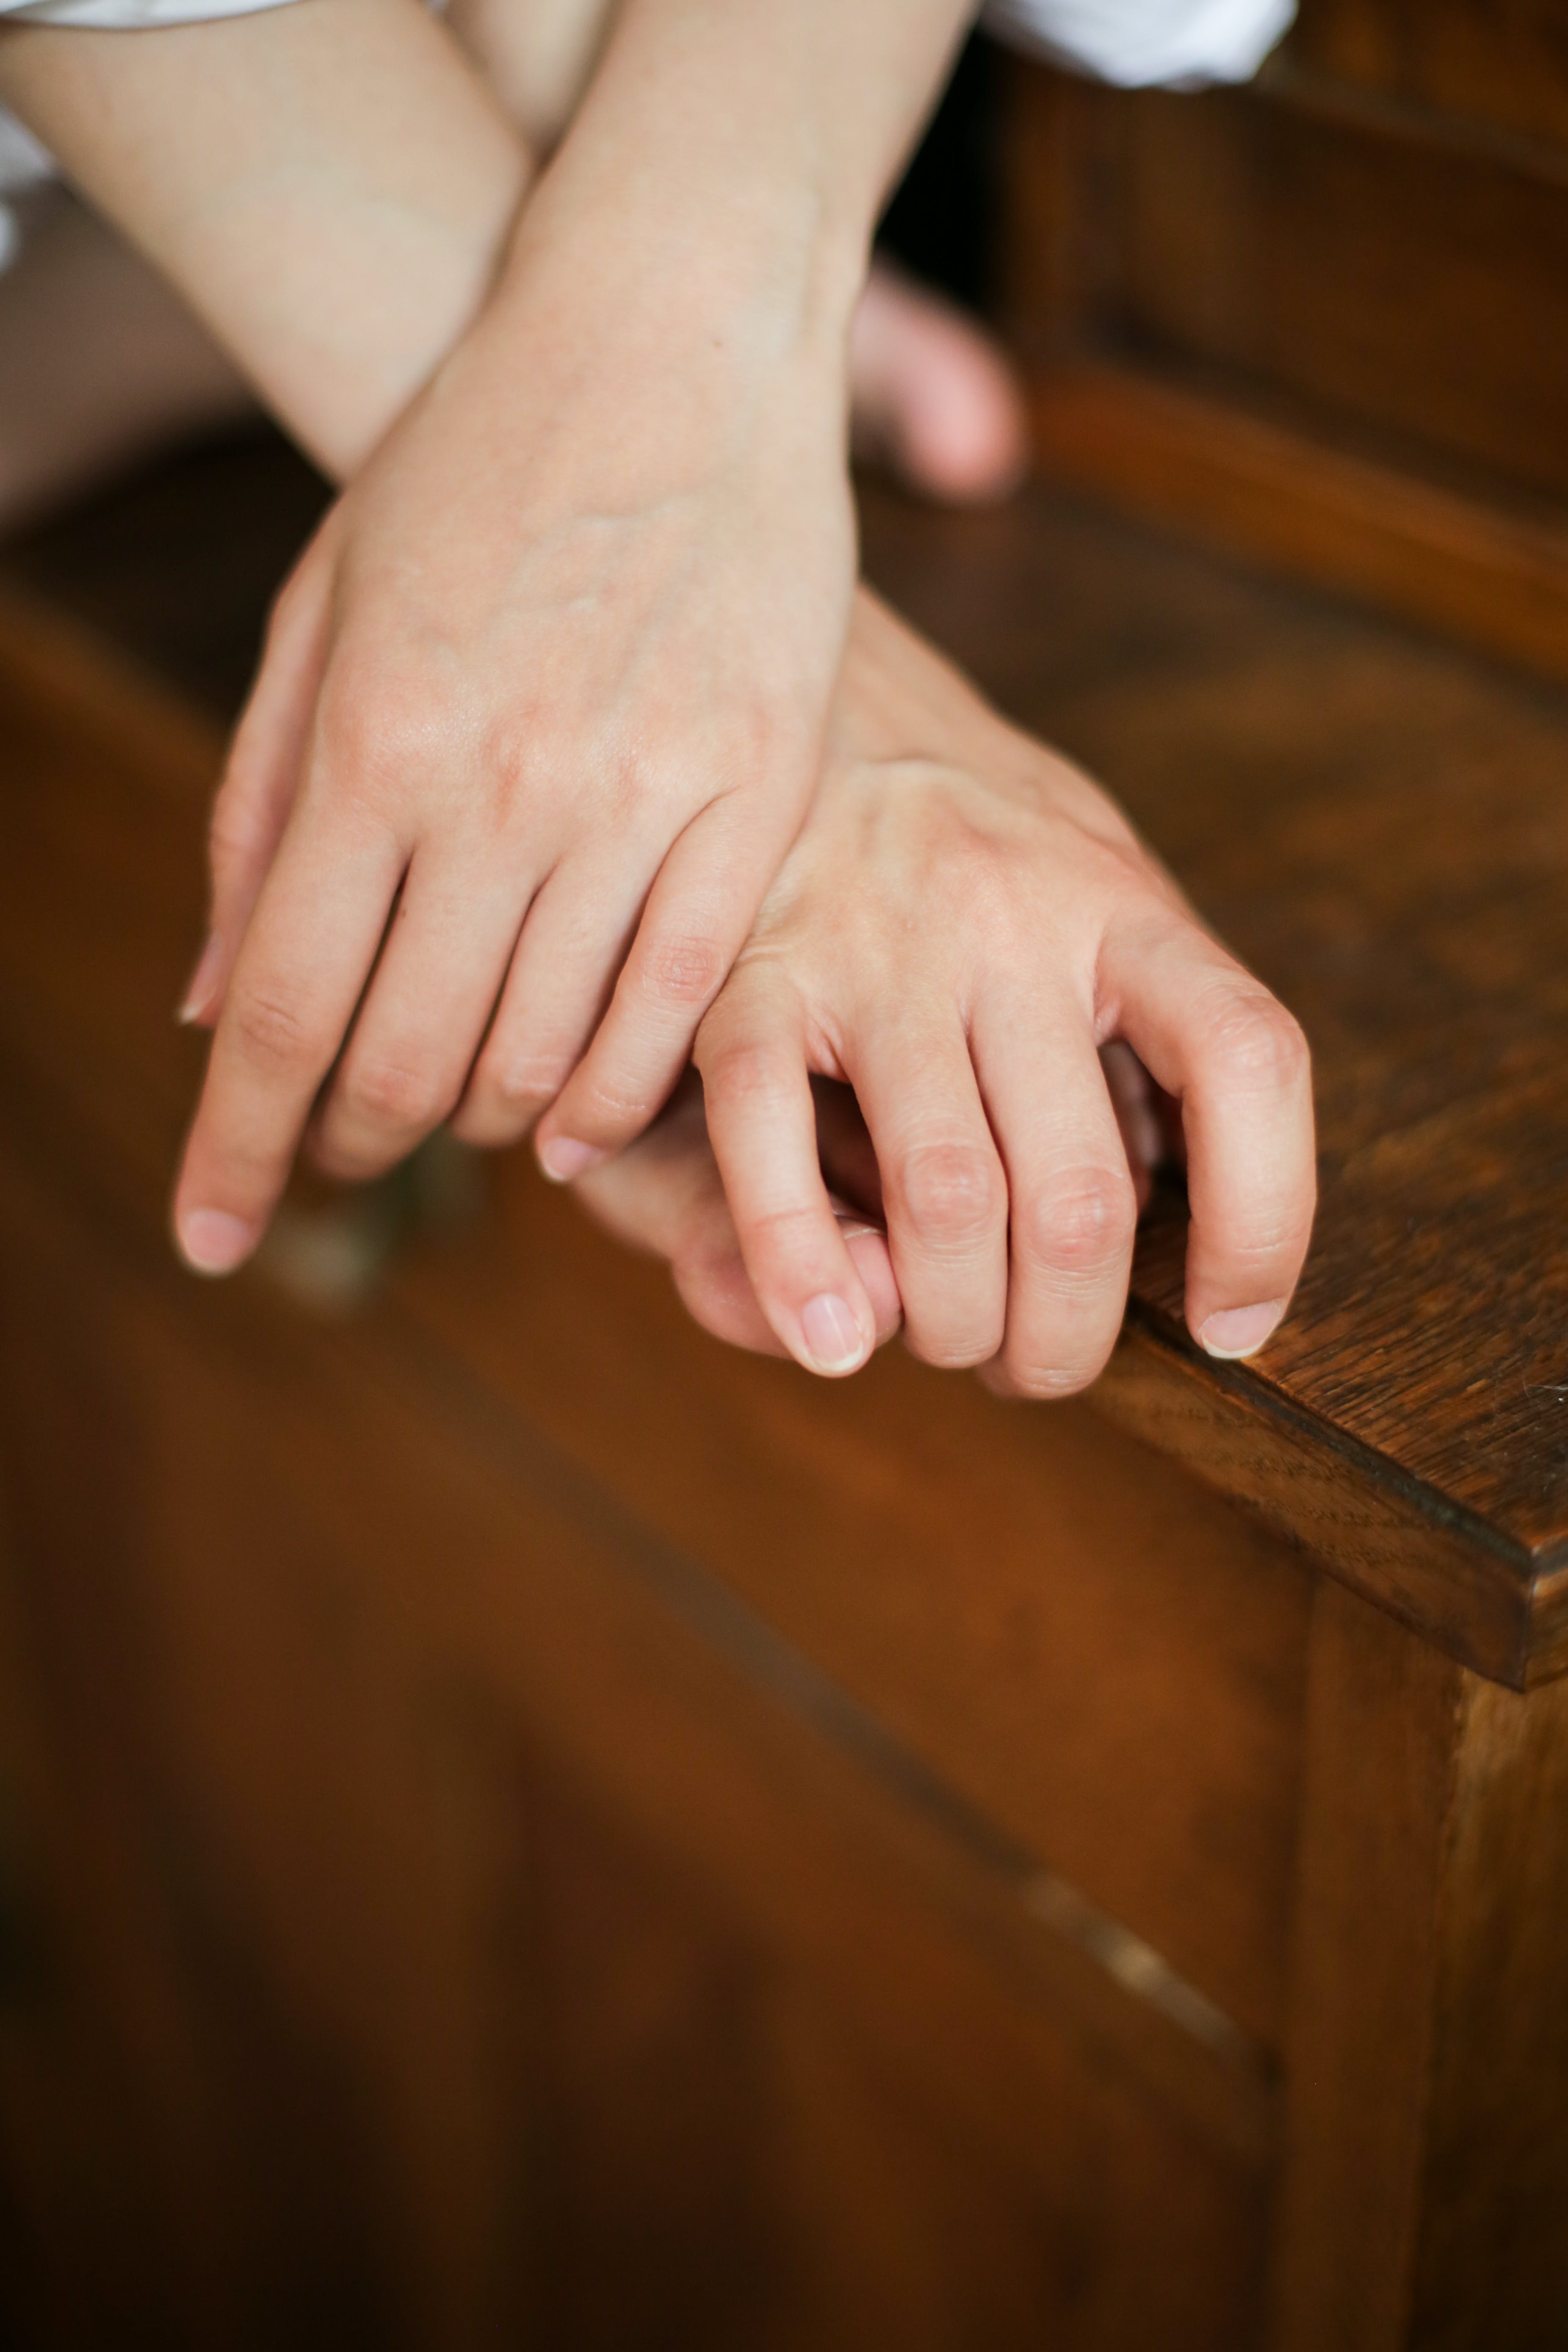 A person's hands on a wooden table. | Source: Pexels